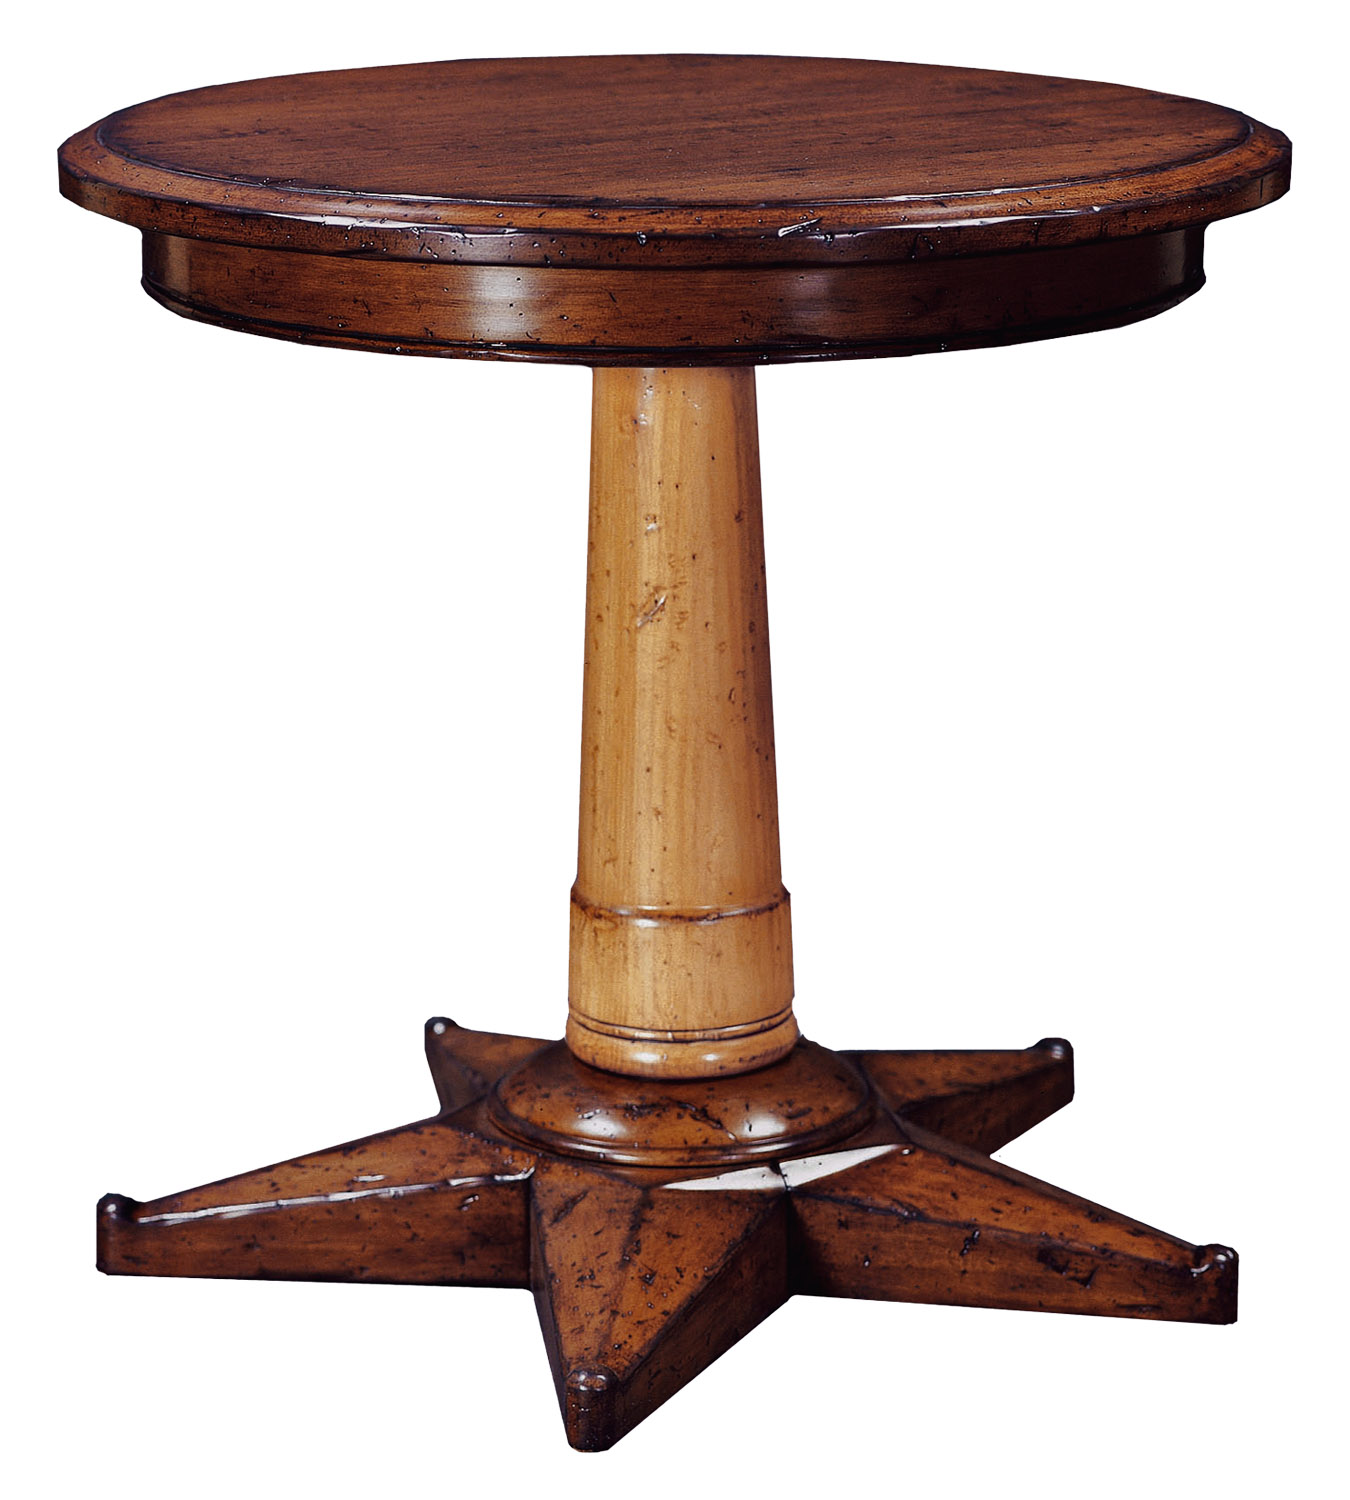 Malkova traditional transitional star base pedestal side table by Woodland furniture in Idaho Falls